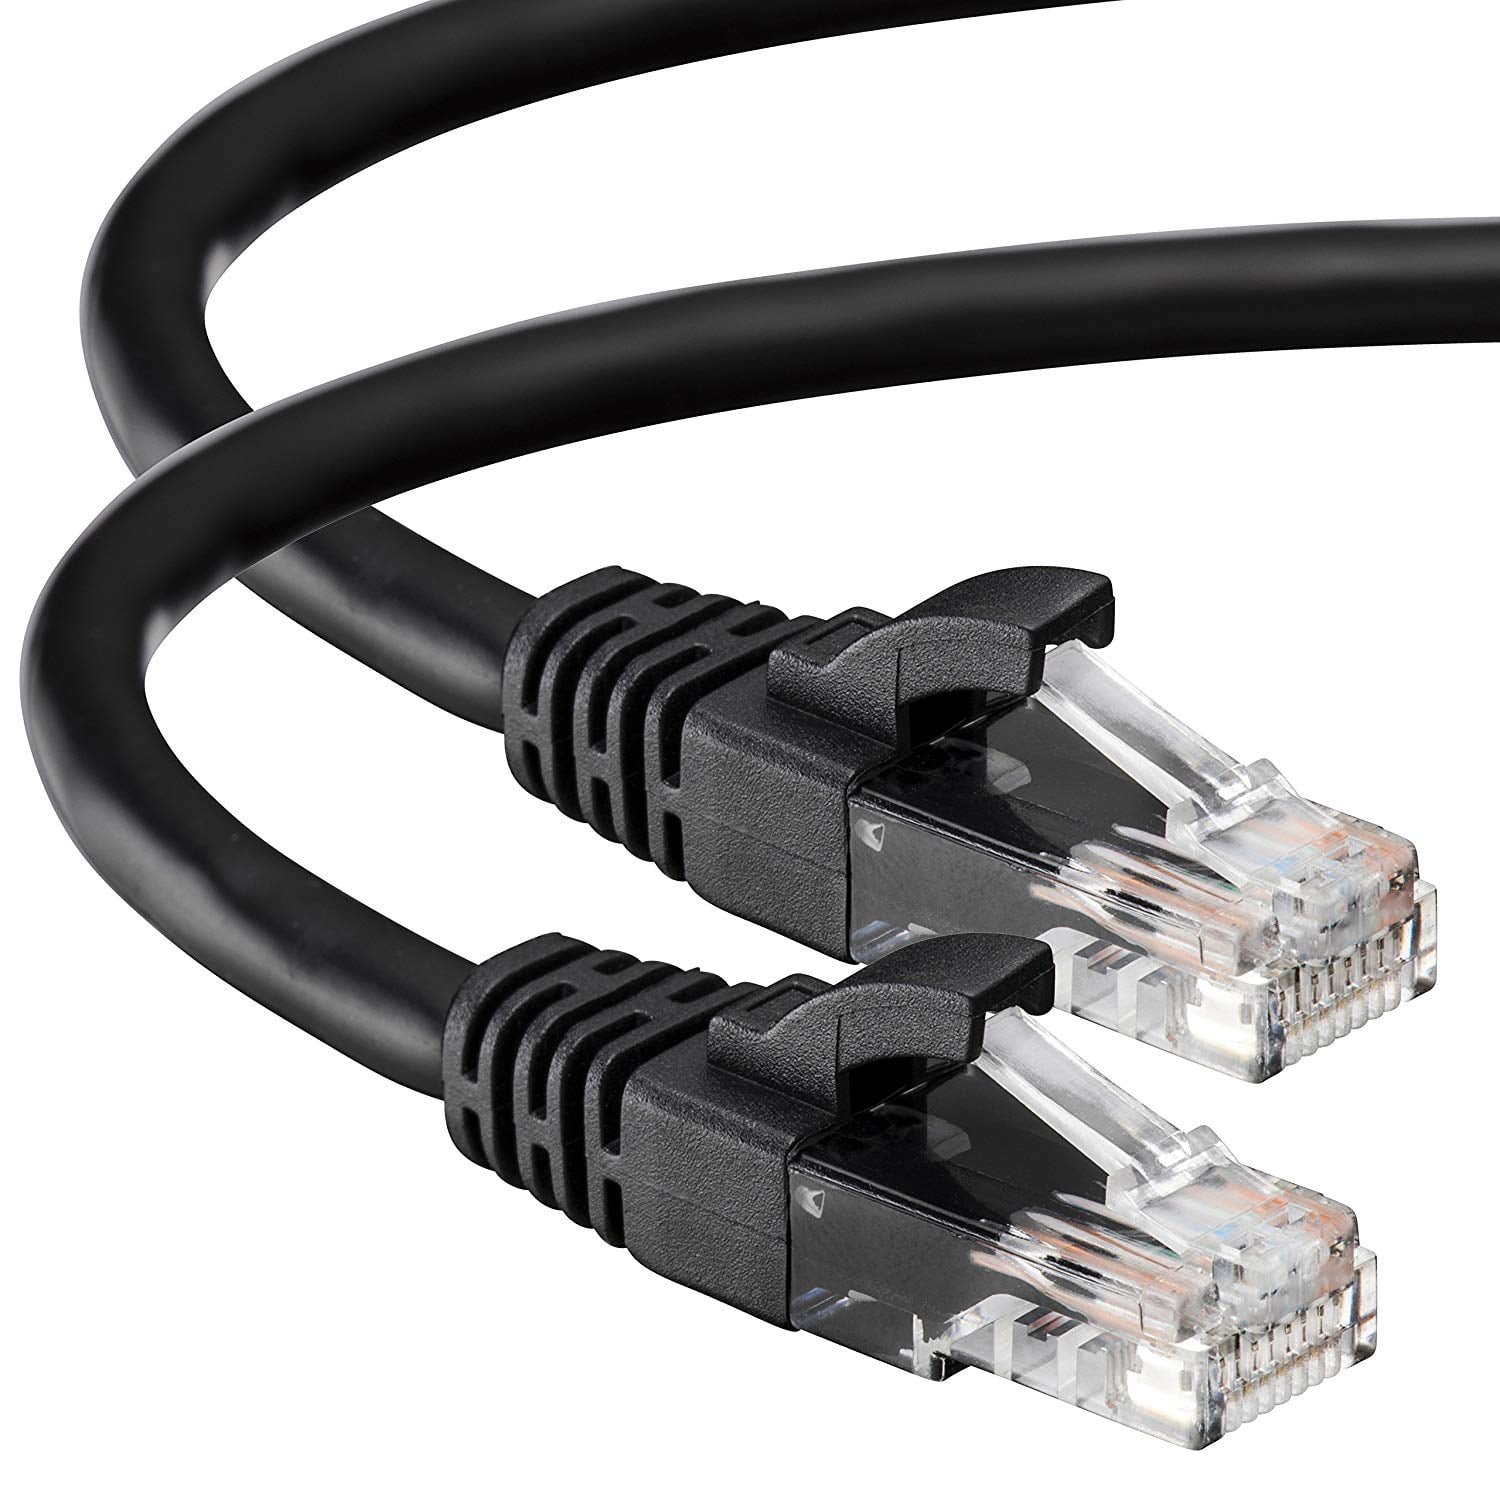 44822 LINDY 1 Meter CAT6 UTP Network Cable Gray 